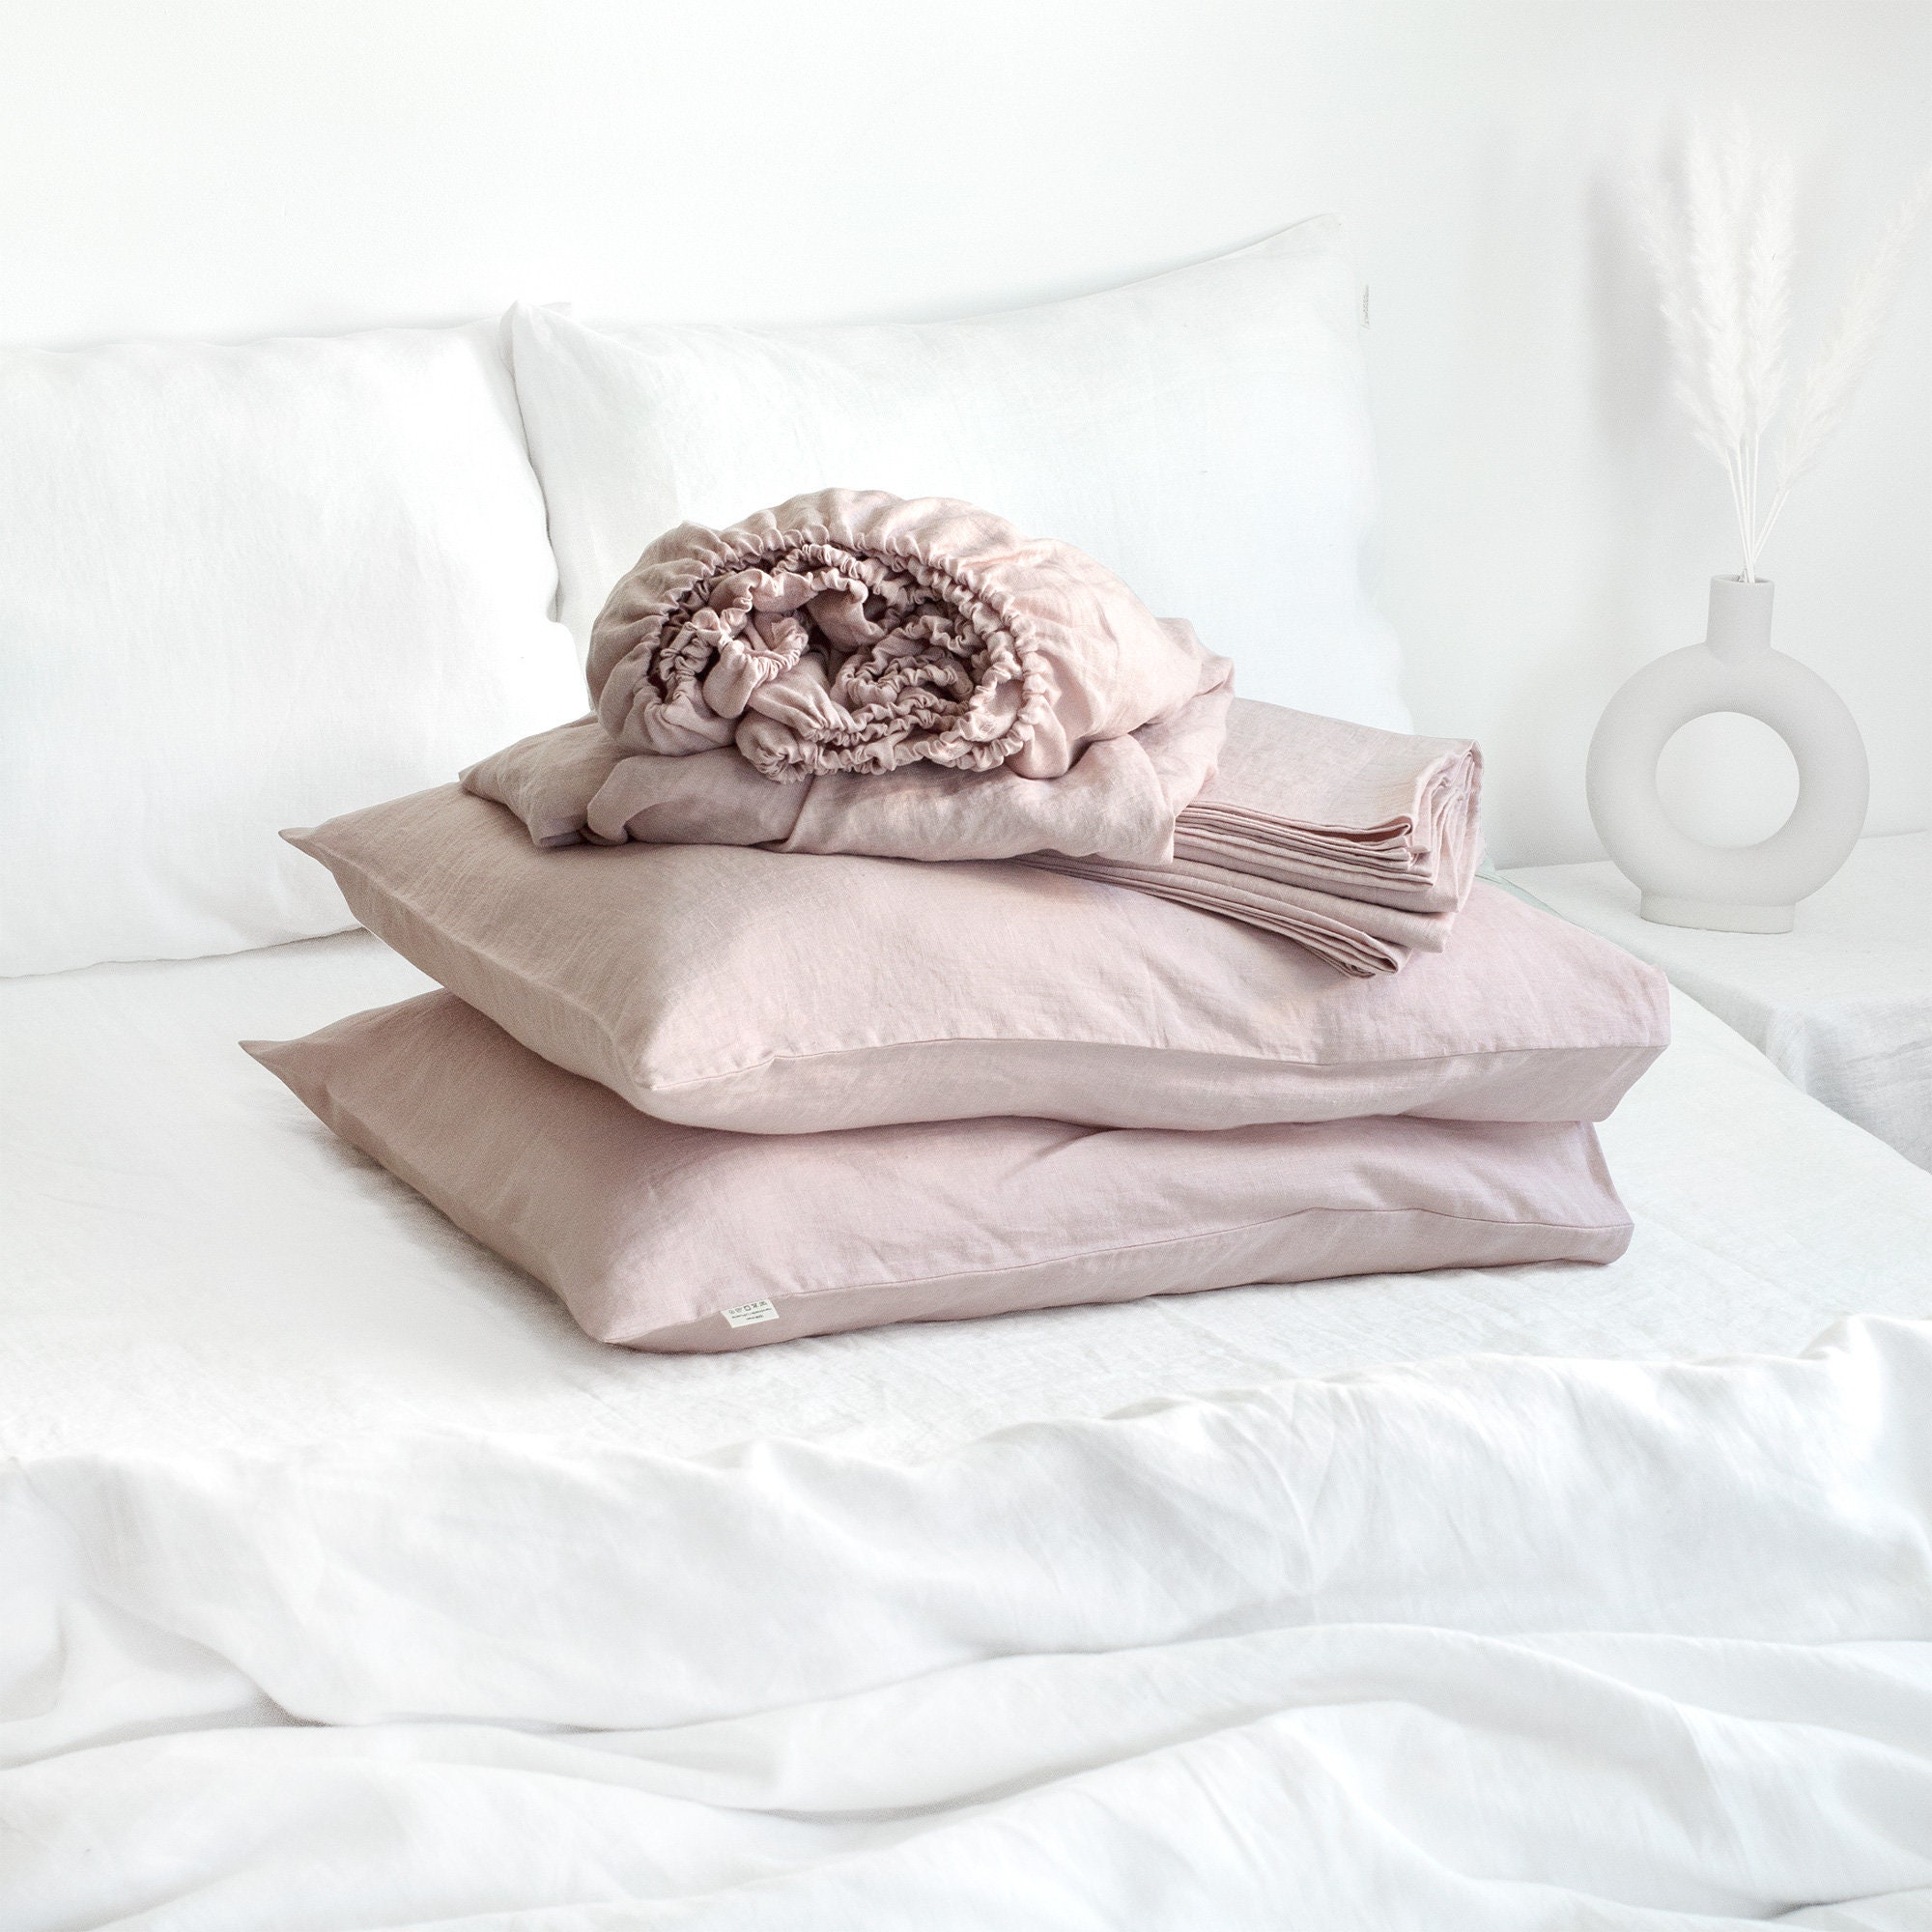 Linen Sheet Set in Dusty Rose. Fitted Sheet, Flat & 2 Pillowcases King, Queen, Twin, Full, Double Size. Rose Pink Bedding